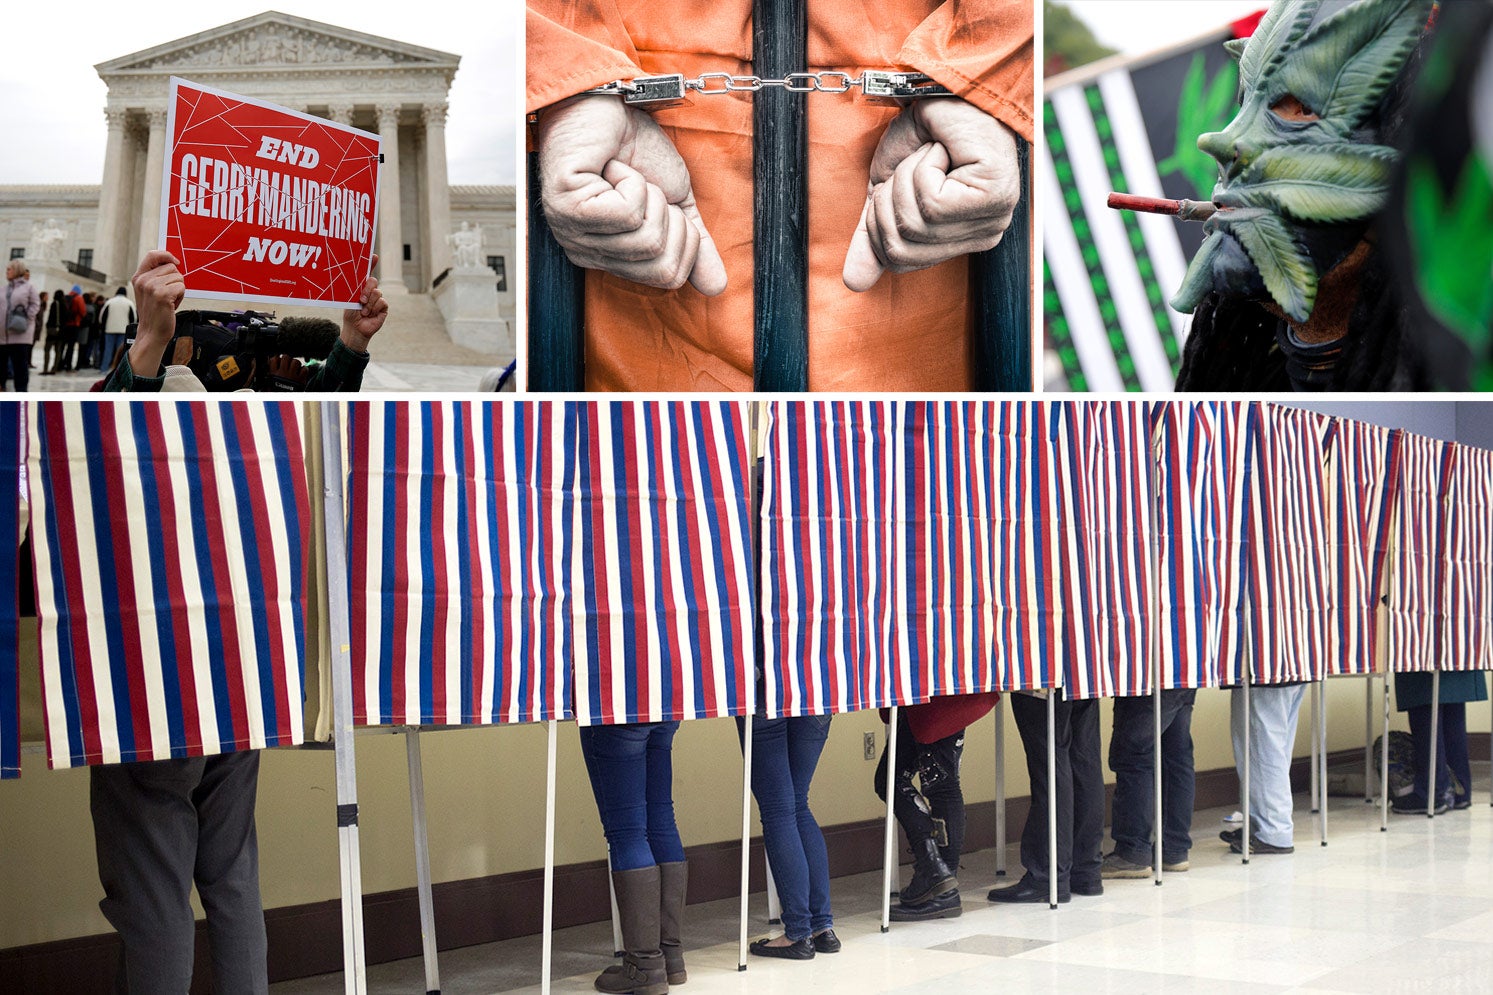 Collage of a sign reading "END GERRYMANDERING NOW!" held up outside the Supreme Court, a prisoner's hands in handcuffs, a person wearing a marijuana leaf mask and smoking a joint, and a row of people in voting booths.